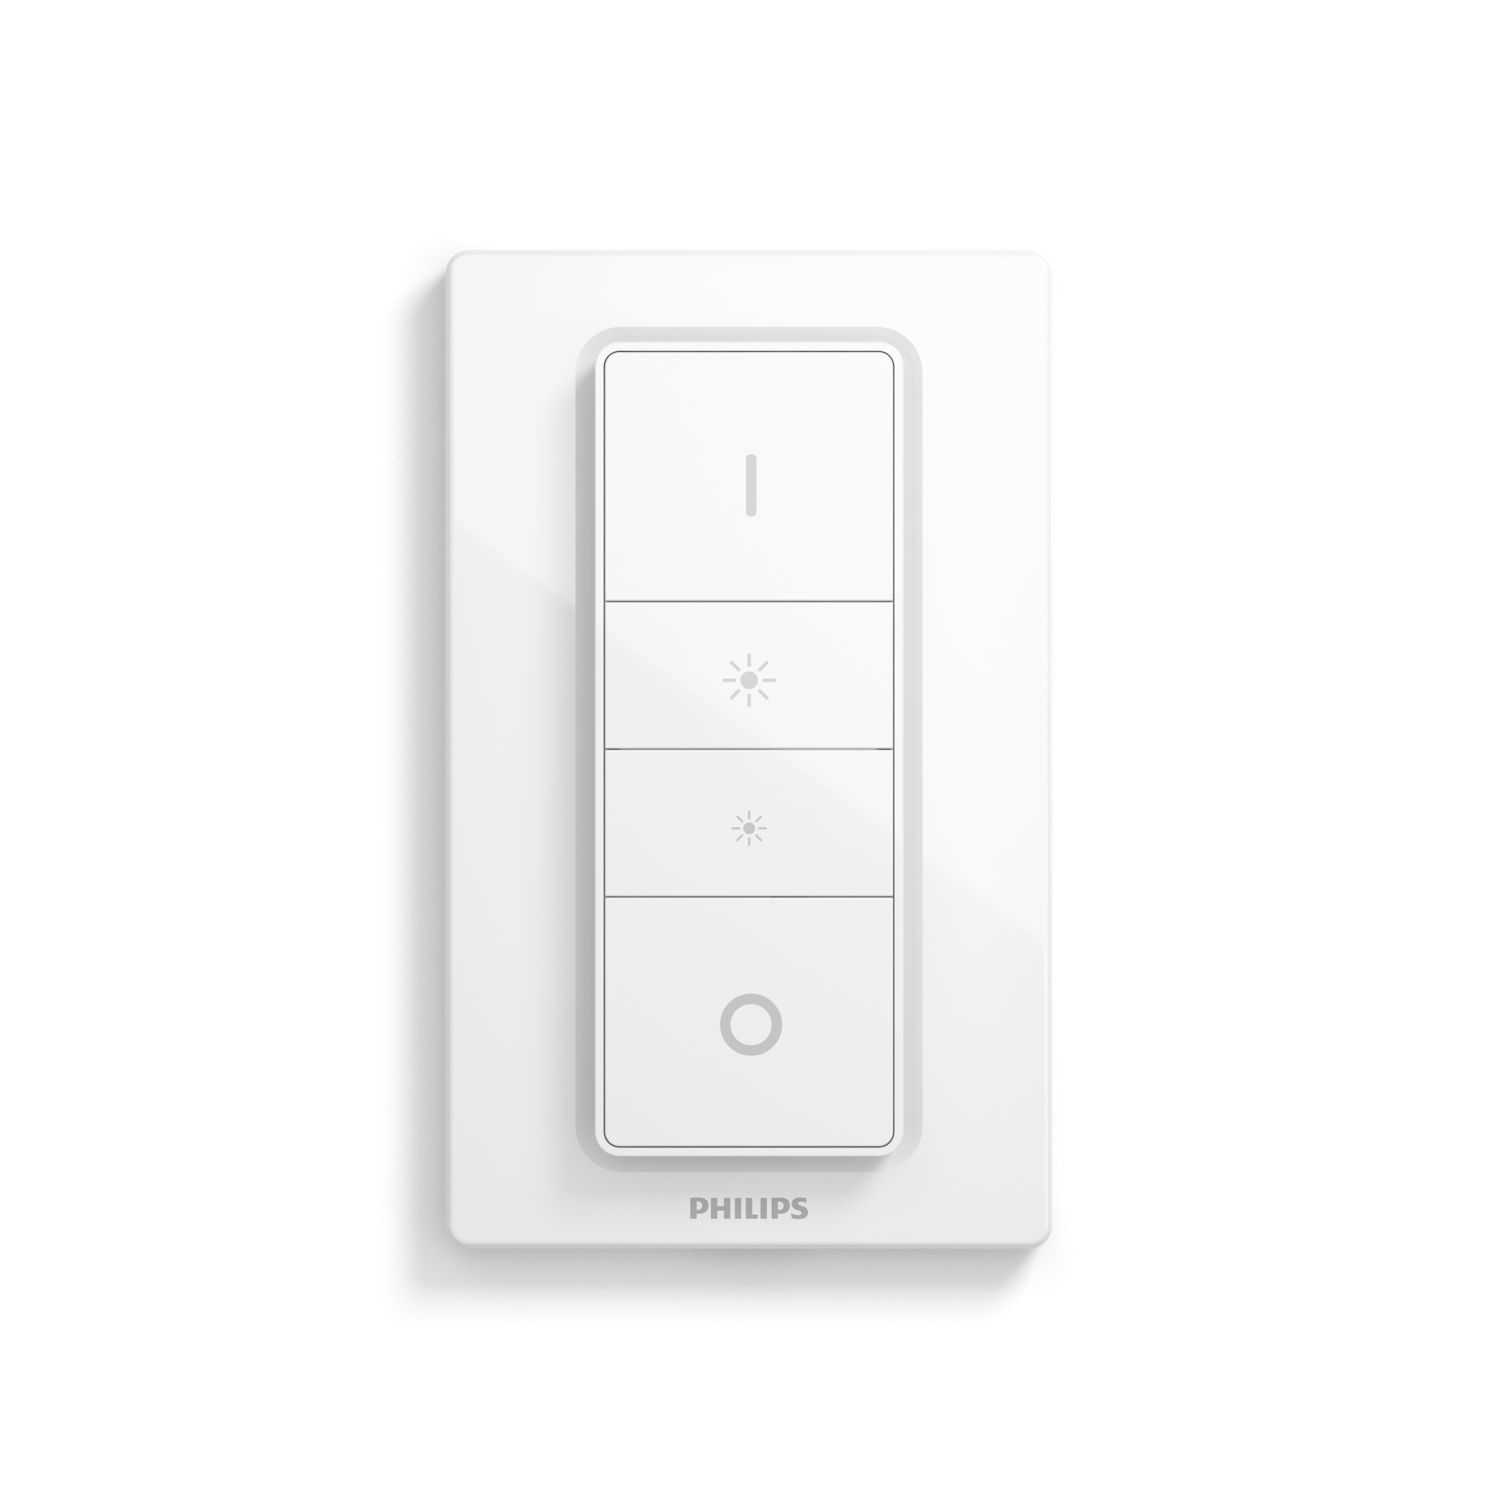 Dimmer switch PHILIPS HUE